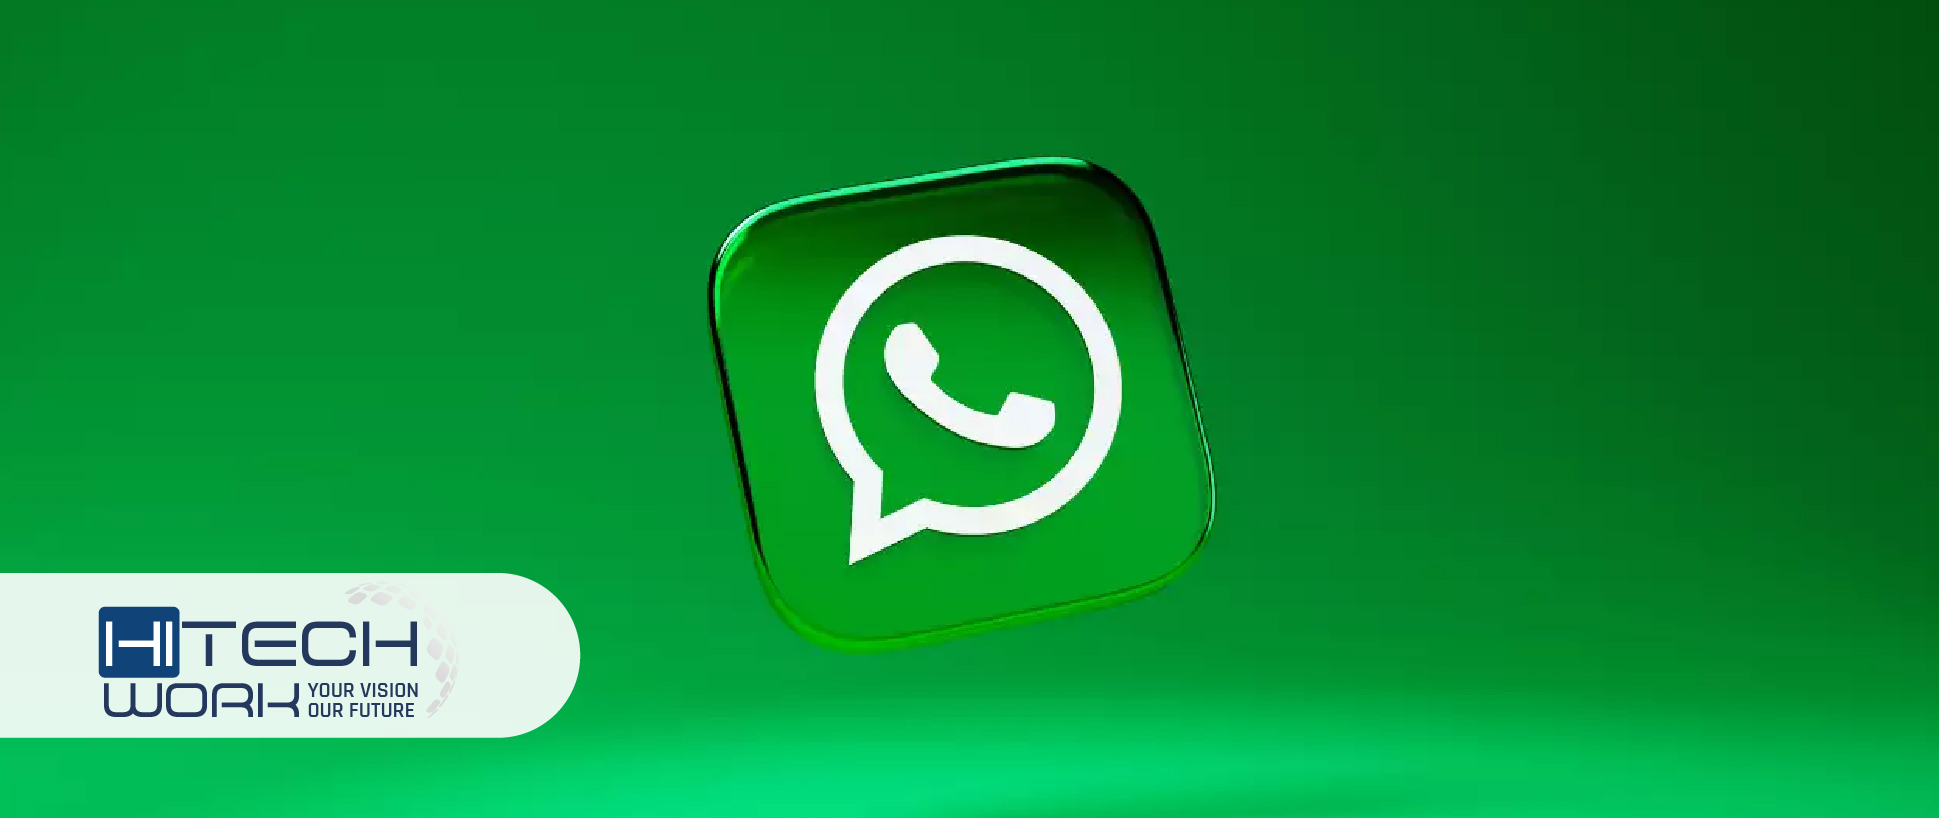 WhatsApp is Ready to Rollout 3 New Shortcuts